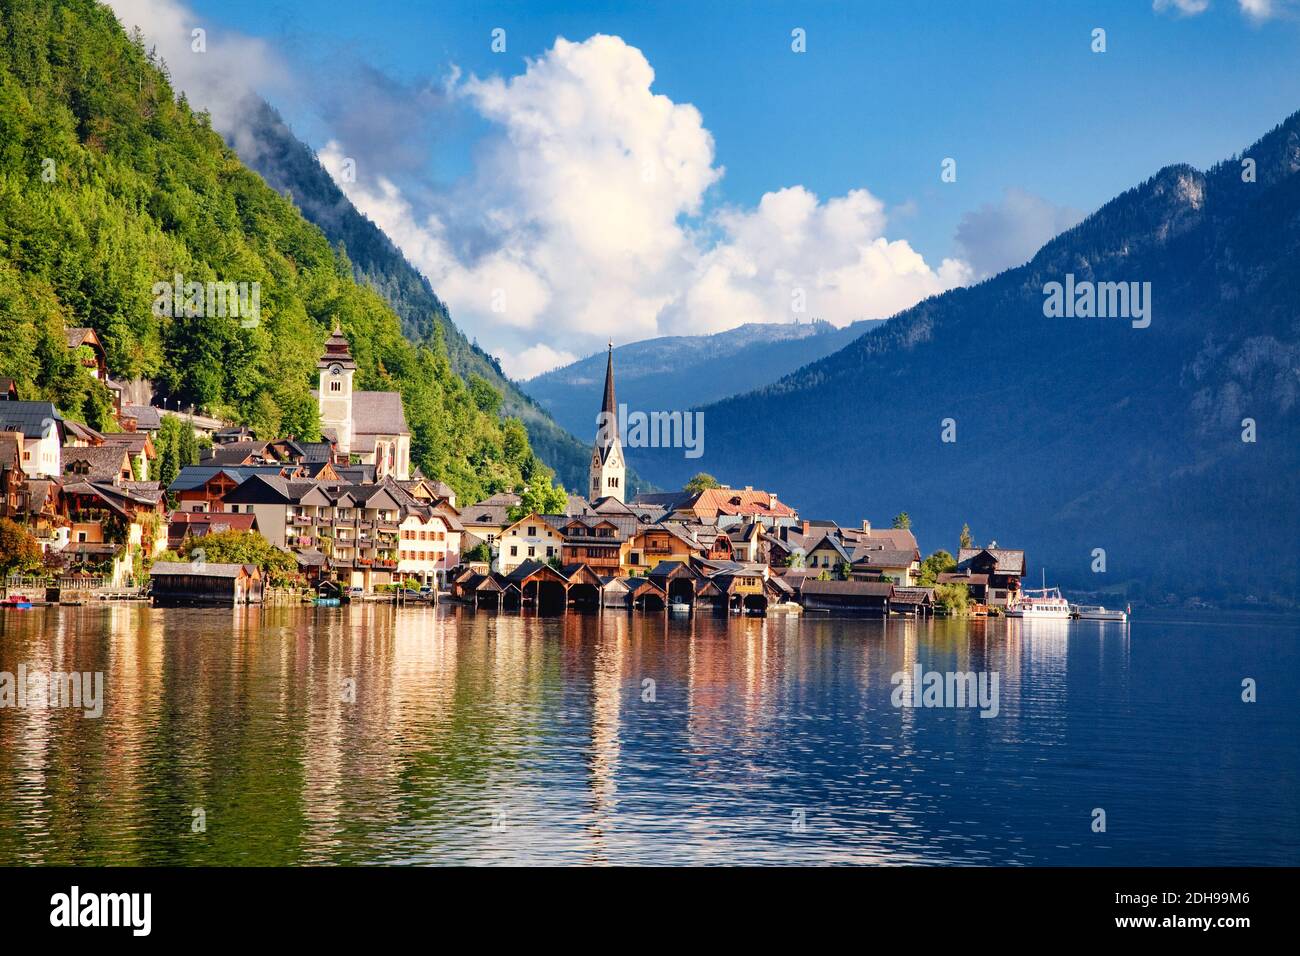 The small, historic and very scenic Hallstatt sits on the shores of the Halstattersee, Austria. Stock Photo